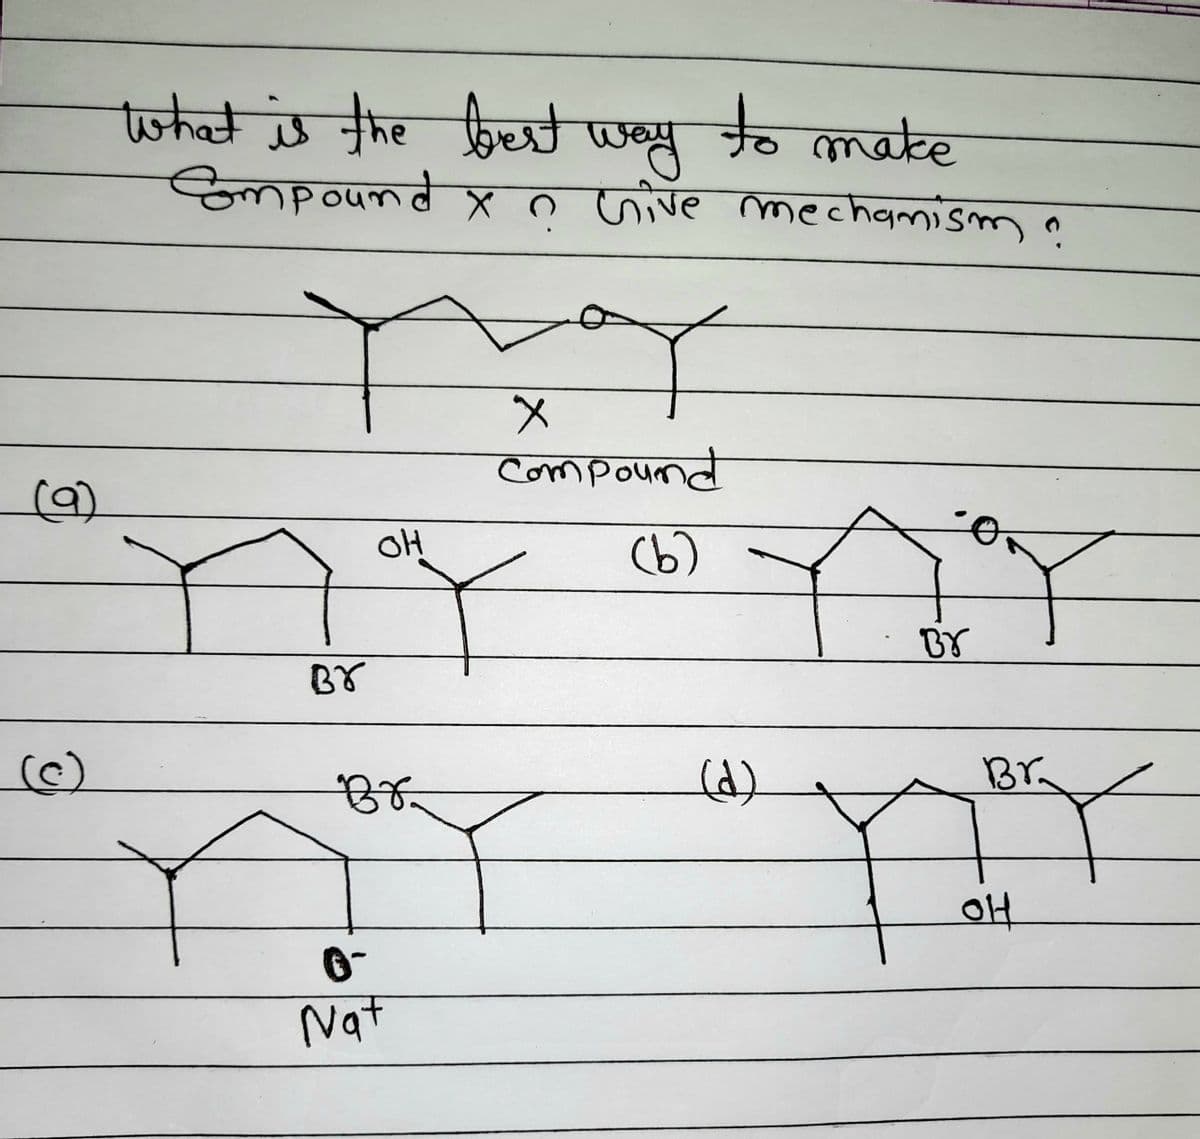 what is the foet
फ्रिच्छे
way
to make
Smpound X o wive mechamismn
compound
(9)
oH
(b)
BY
BY
(c)
(d)
Br
Nat
